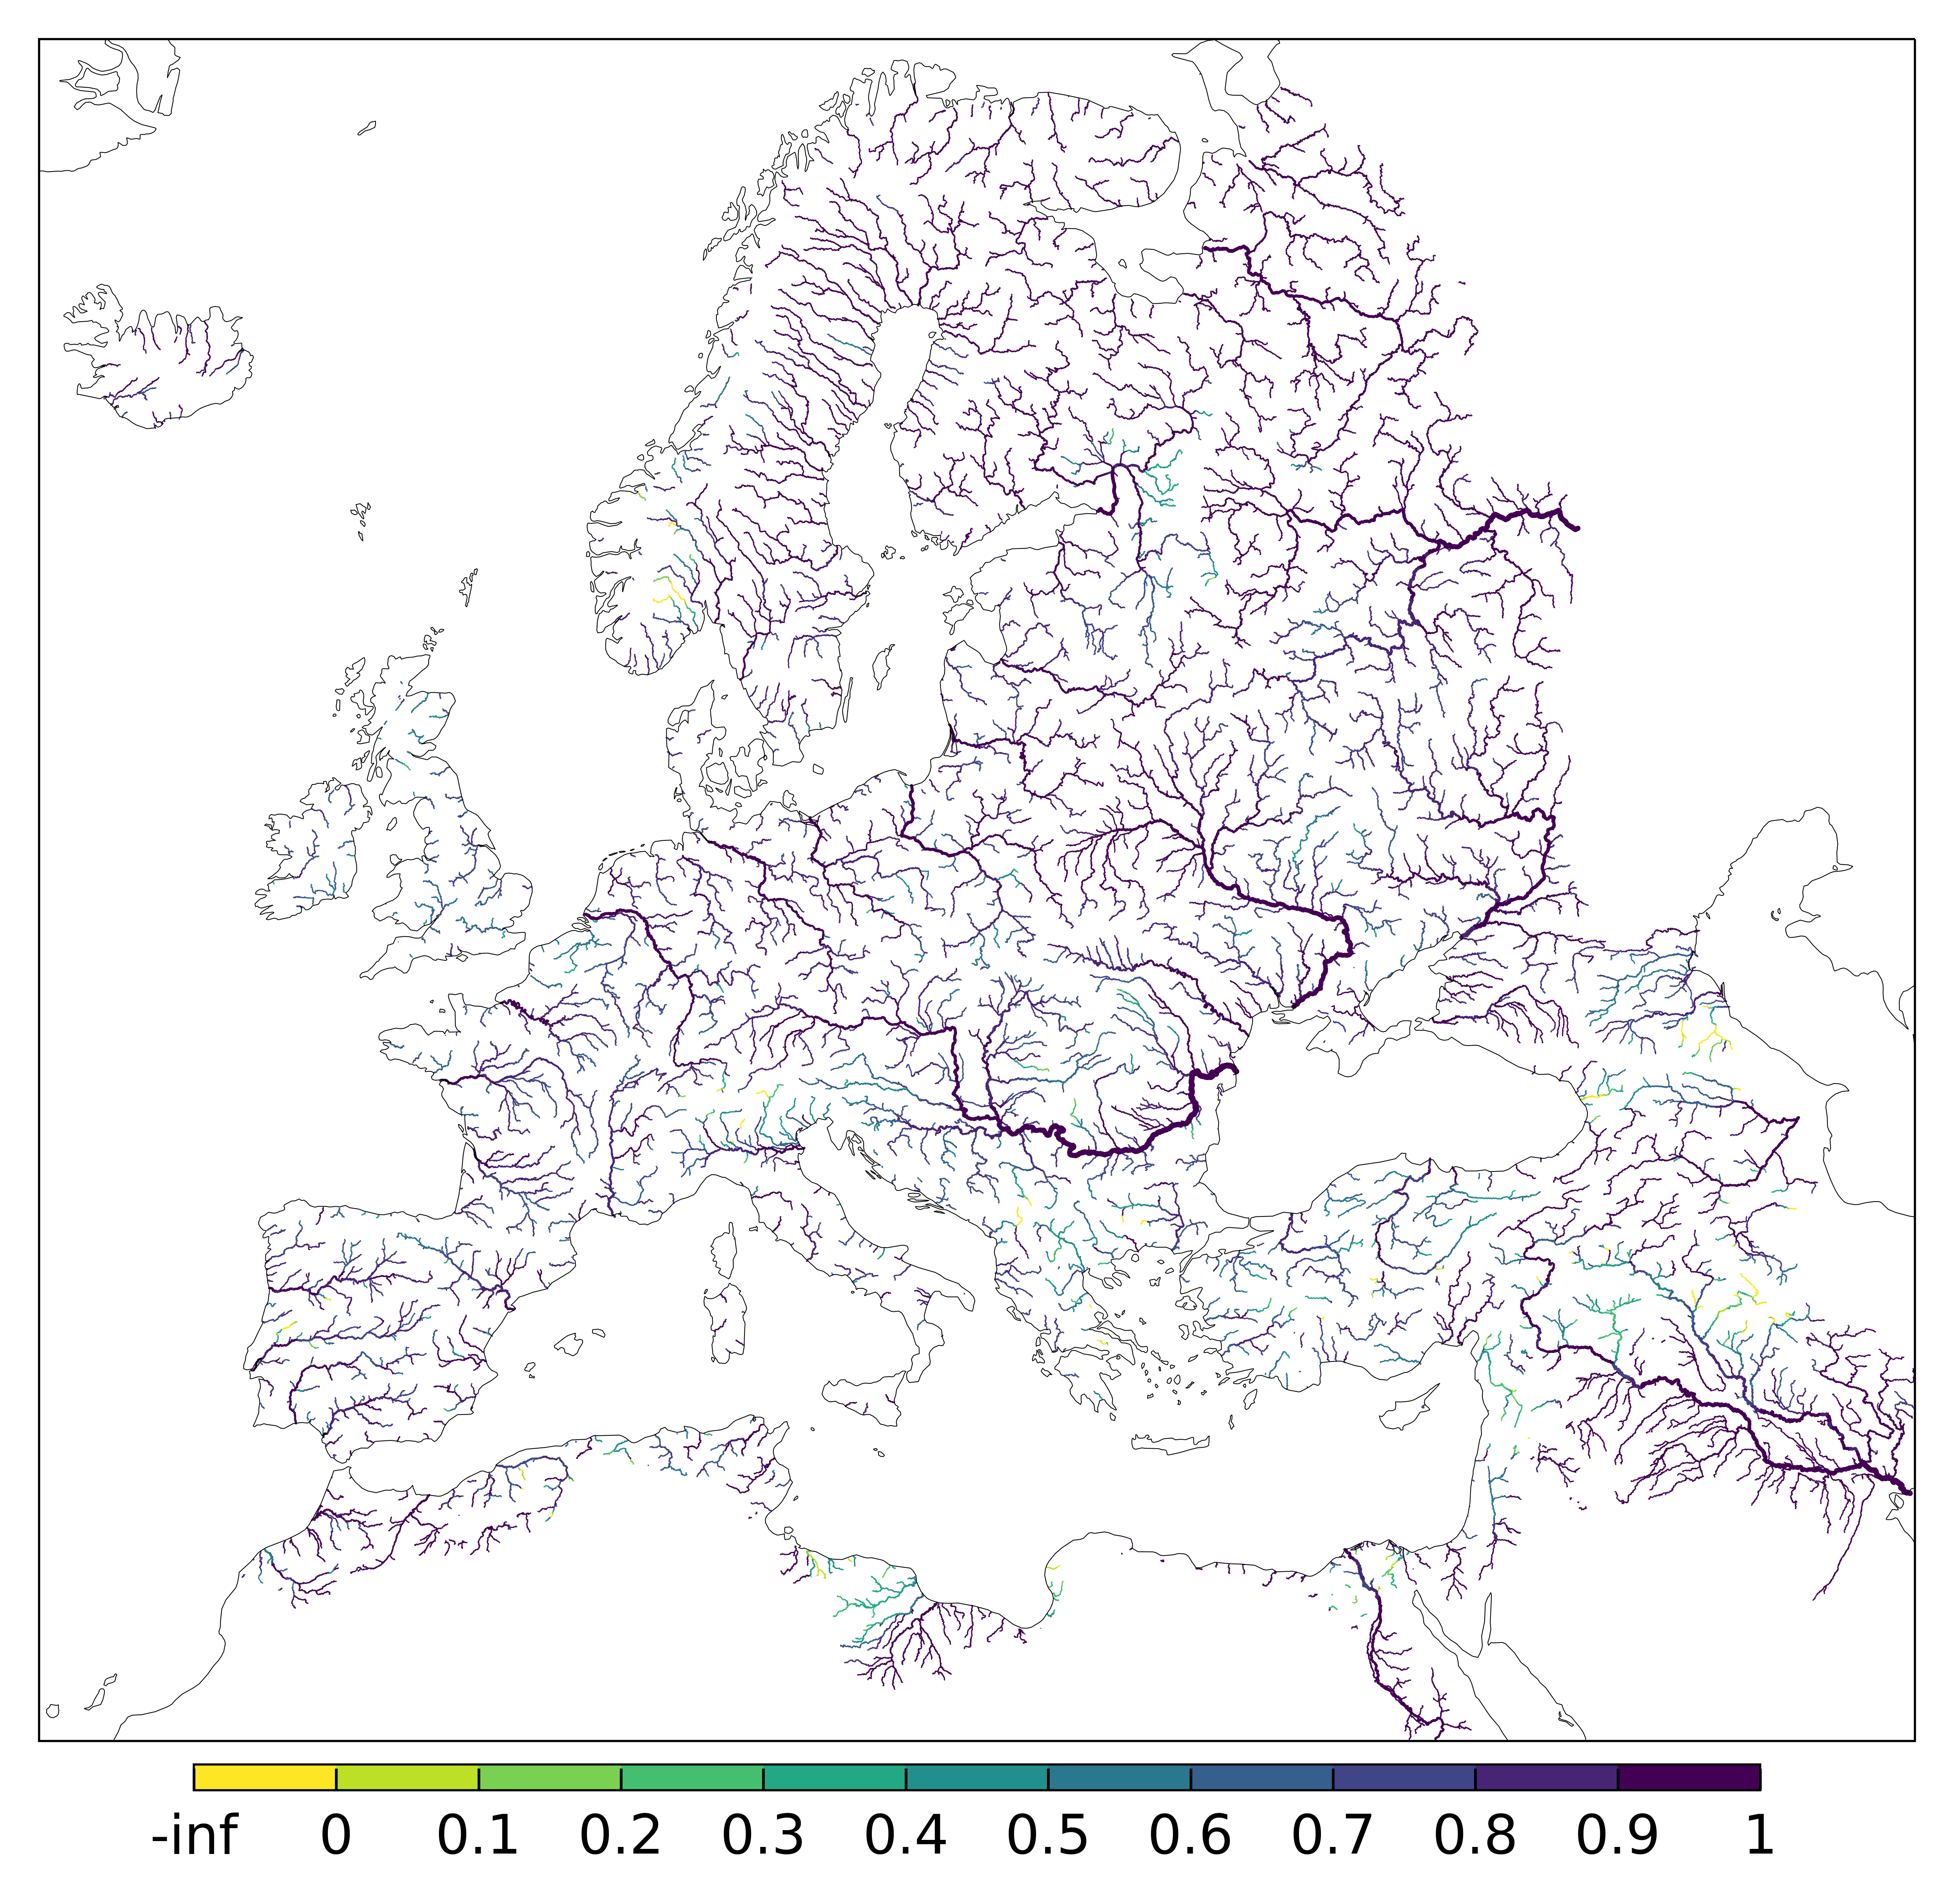 Figure 1. EFAS CRPSS at lead-time 1 day for December 2023 across the EFAS domain for catchments larger than 1000km2. Climatology is used as the reference forecast.